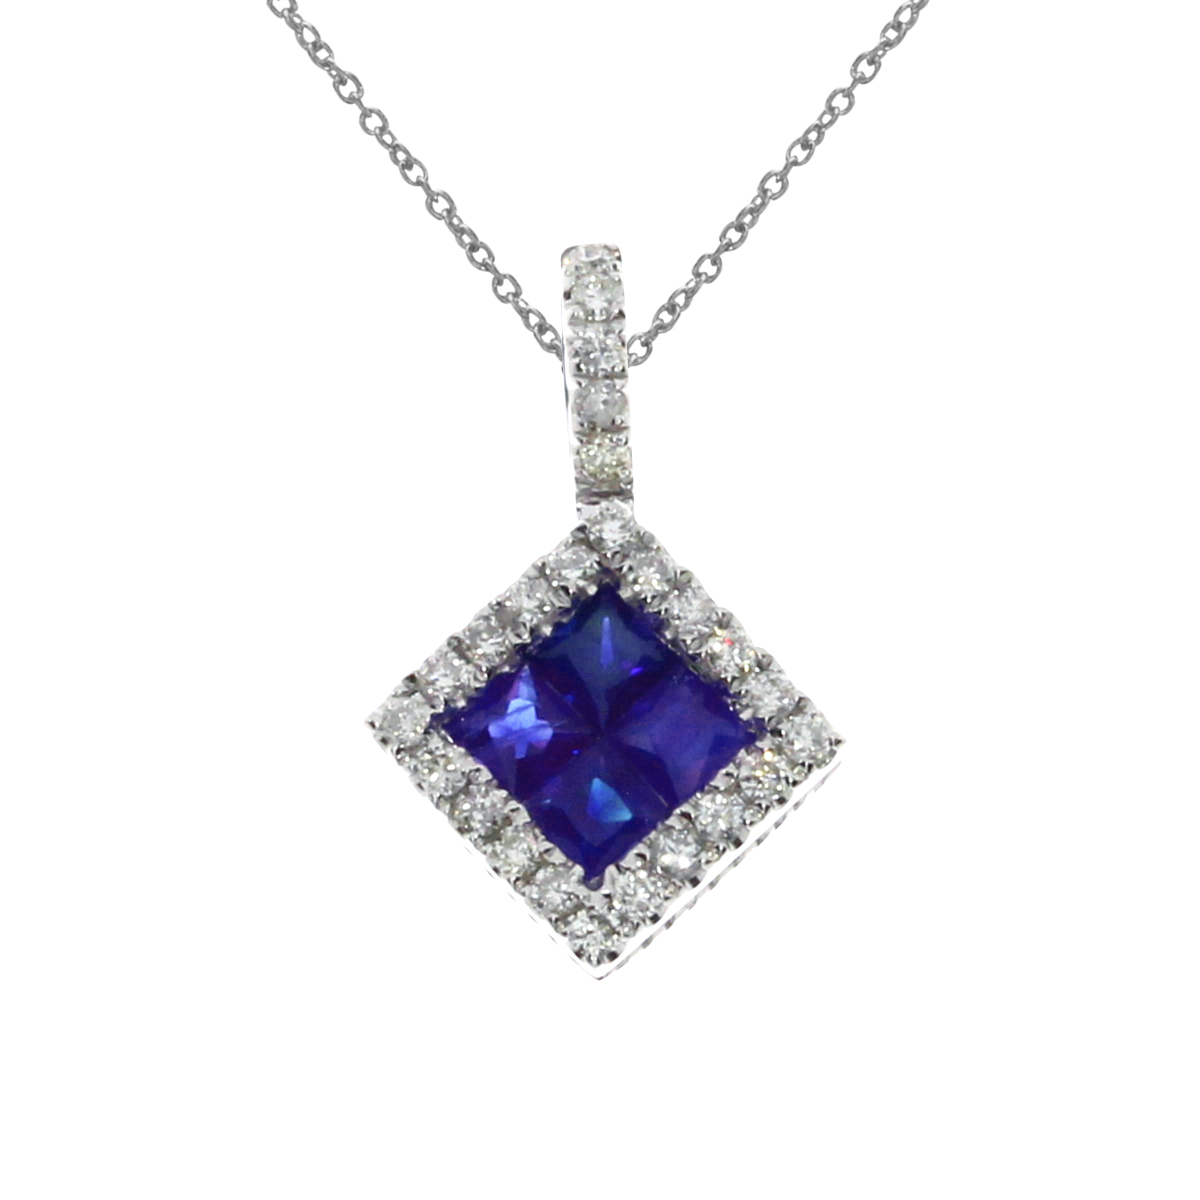 This sparkling pendant features four priness cut sapphires and .14 ct diamonds set in 14k white g...